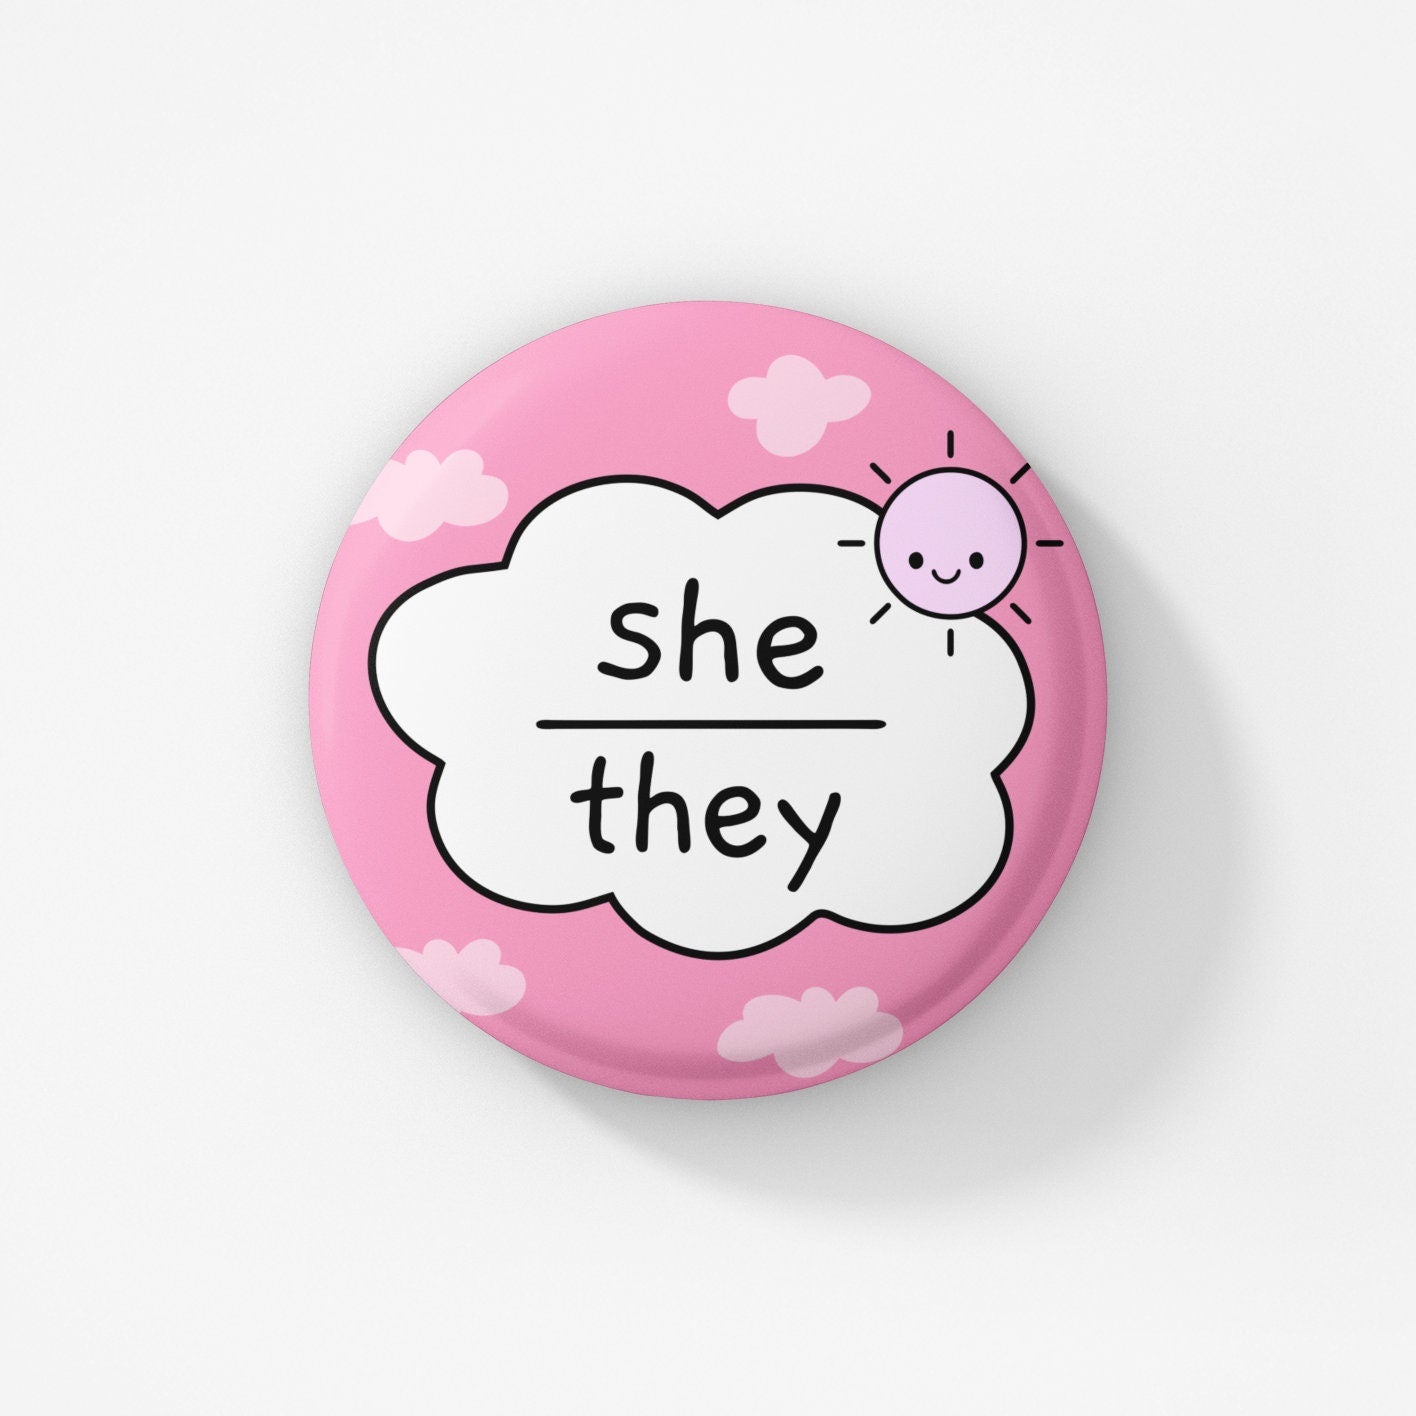 Bubble She Her, She They Badge Pin | MULTIPLE CHOICES | My pronouns are she hers - pronoun badge - pronoun pins